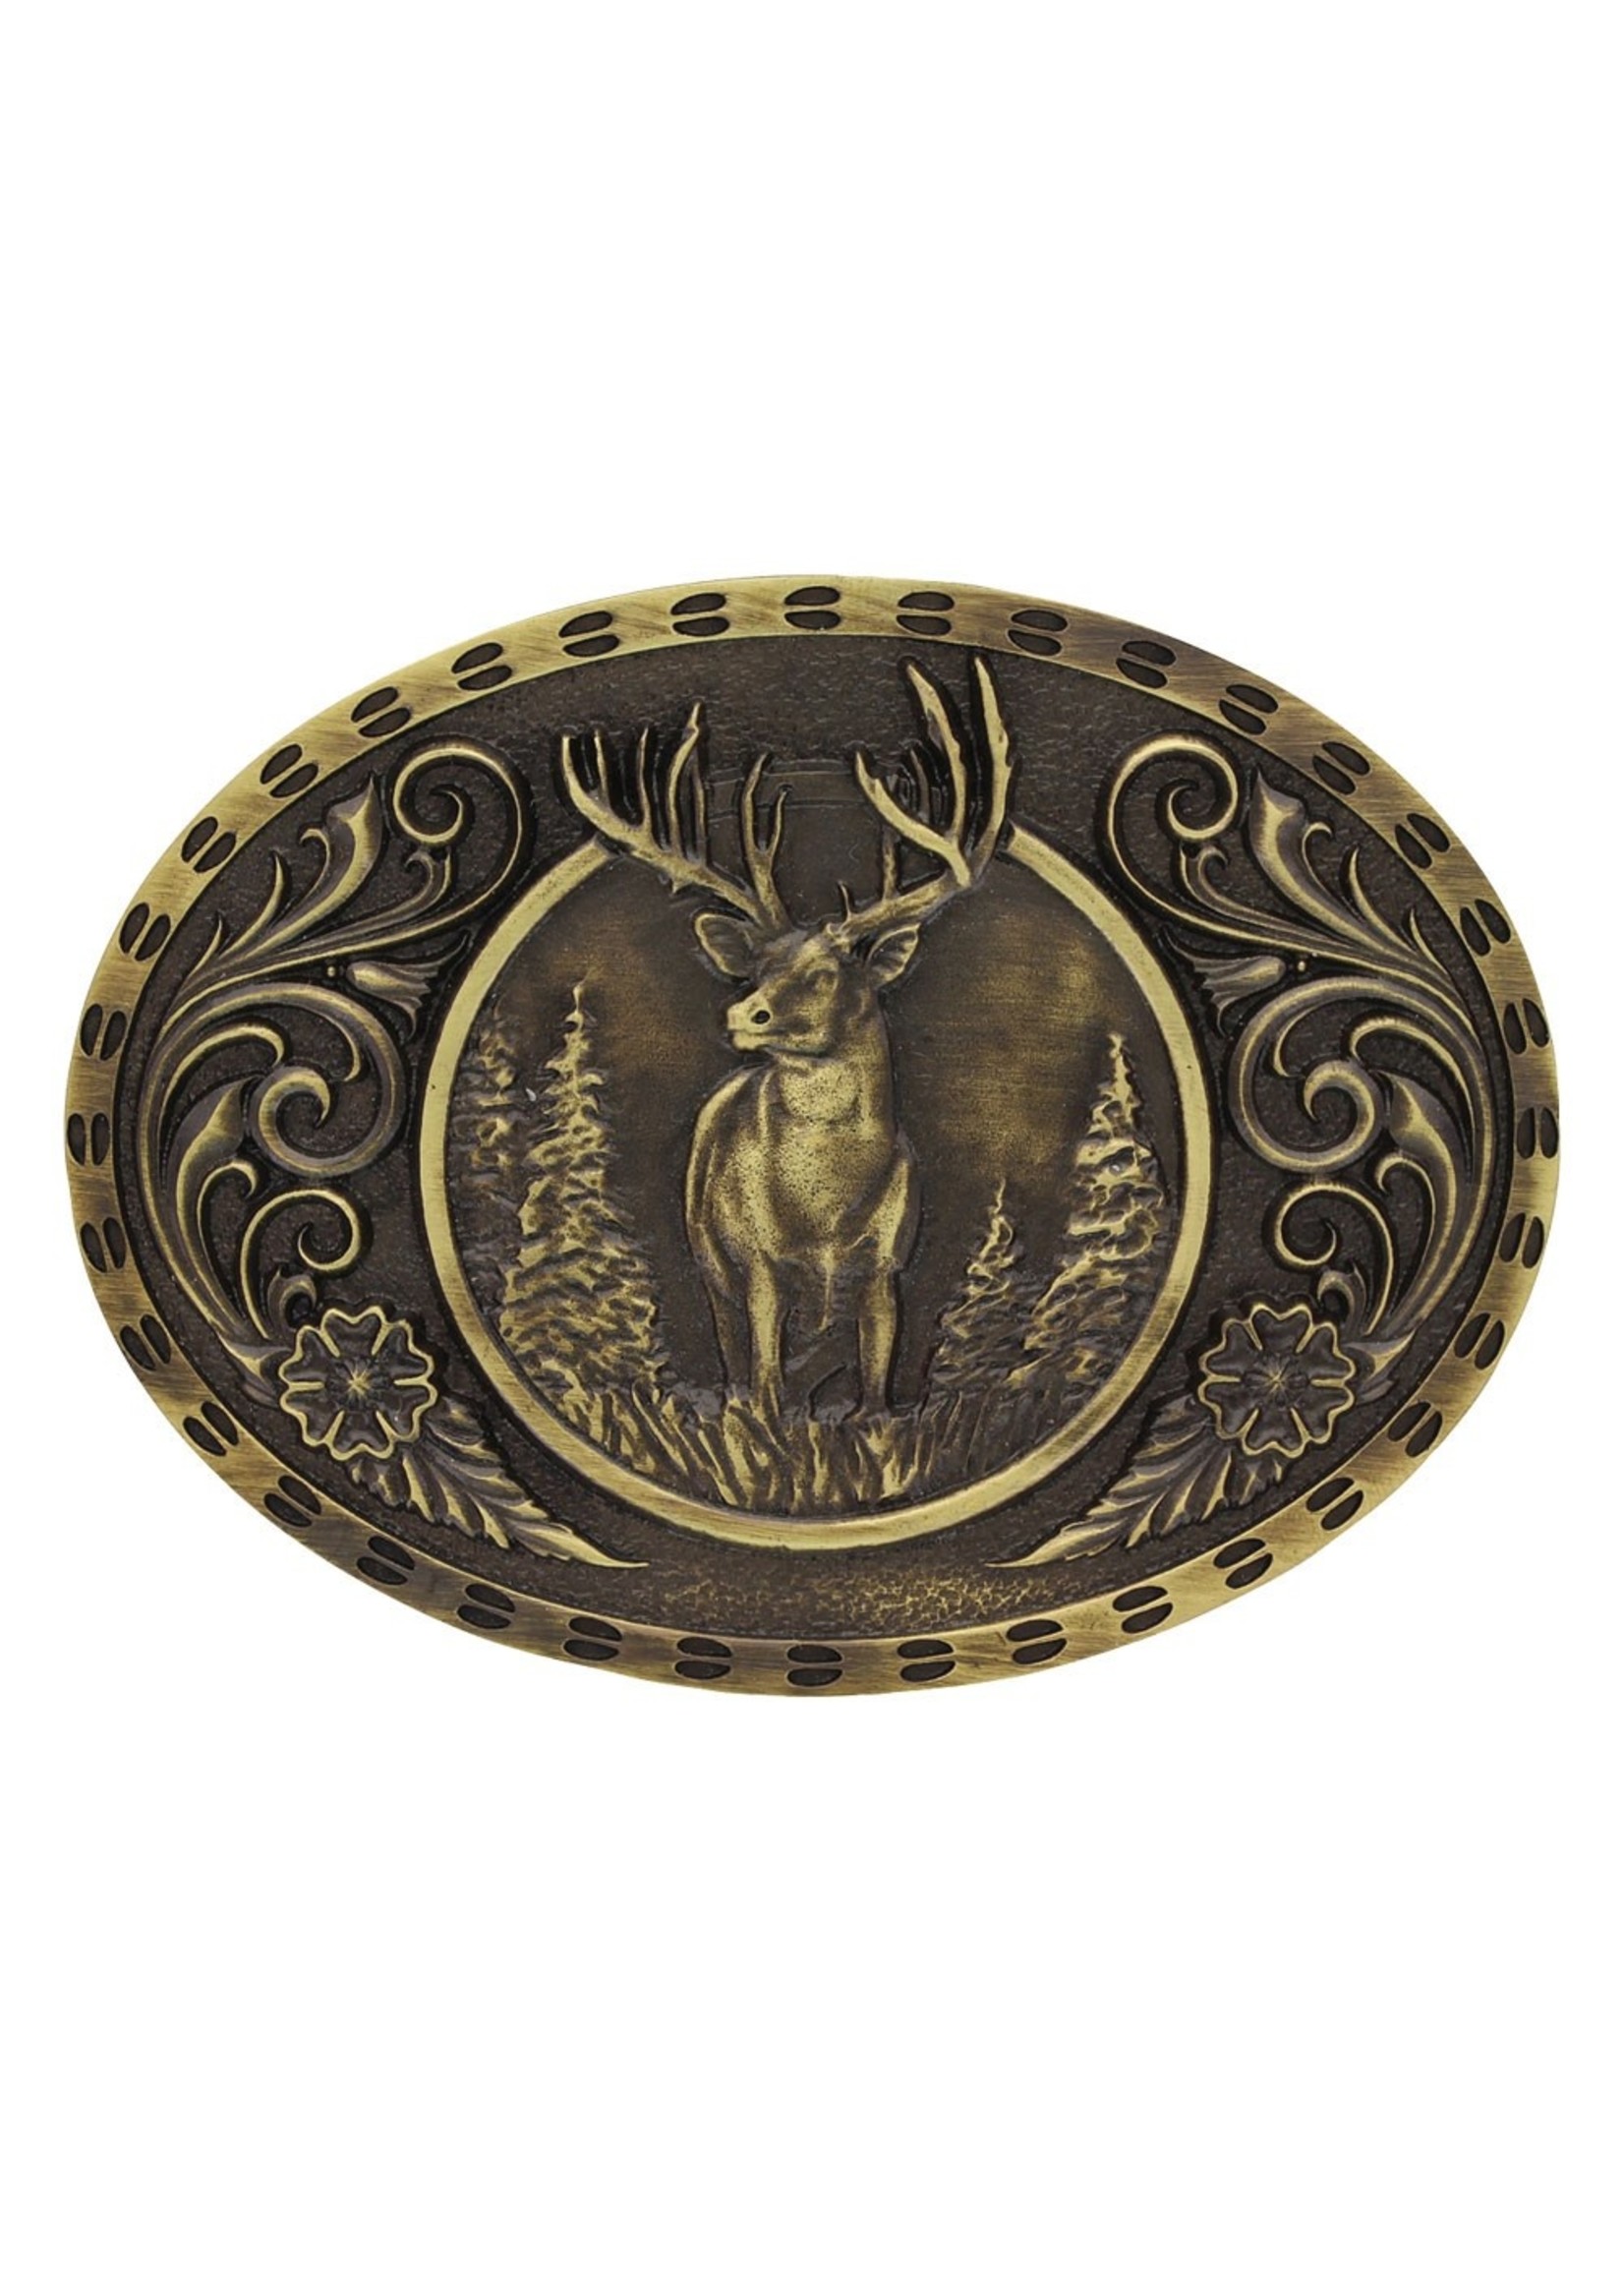 Attiude Buckles Heritage Outdoor Series Wild Stag Carved Buckle